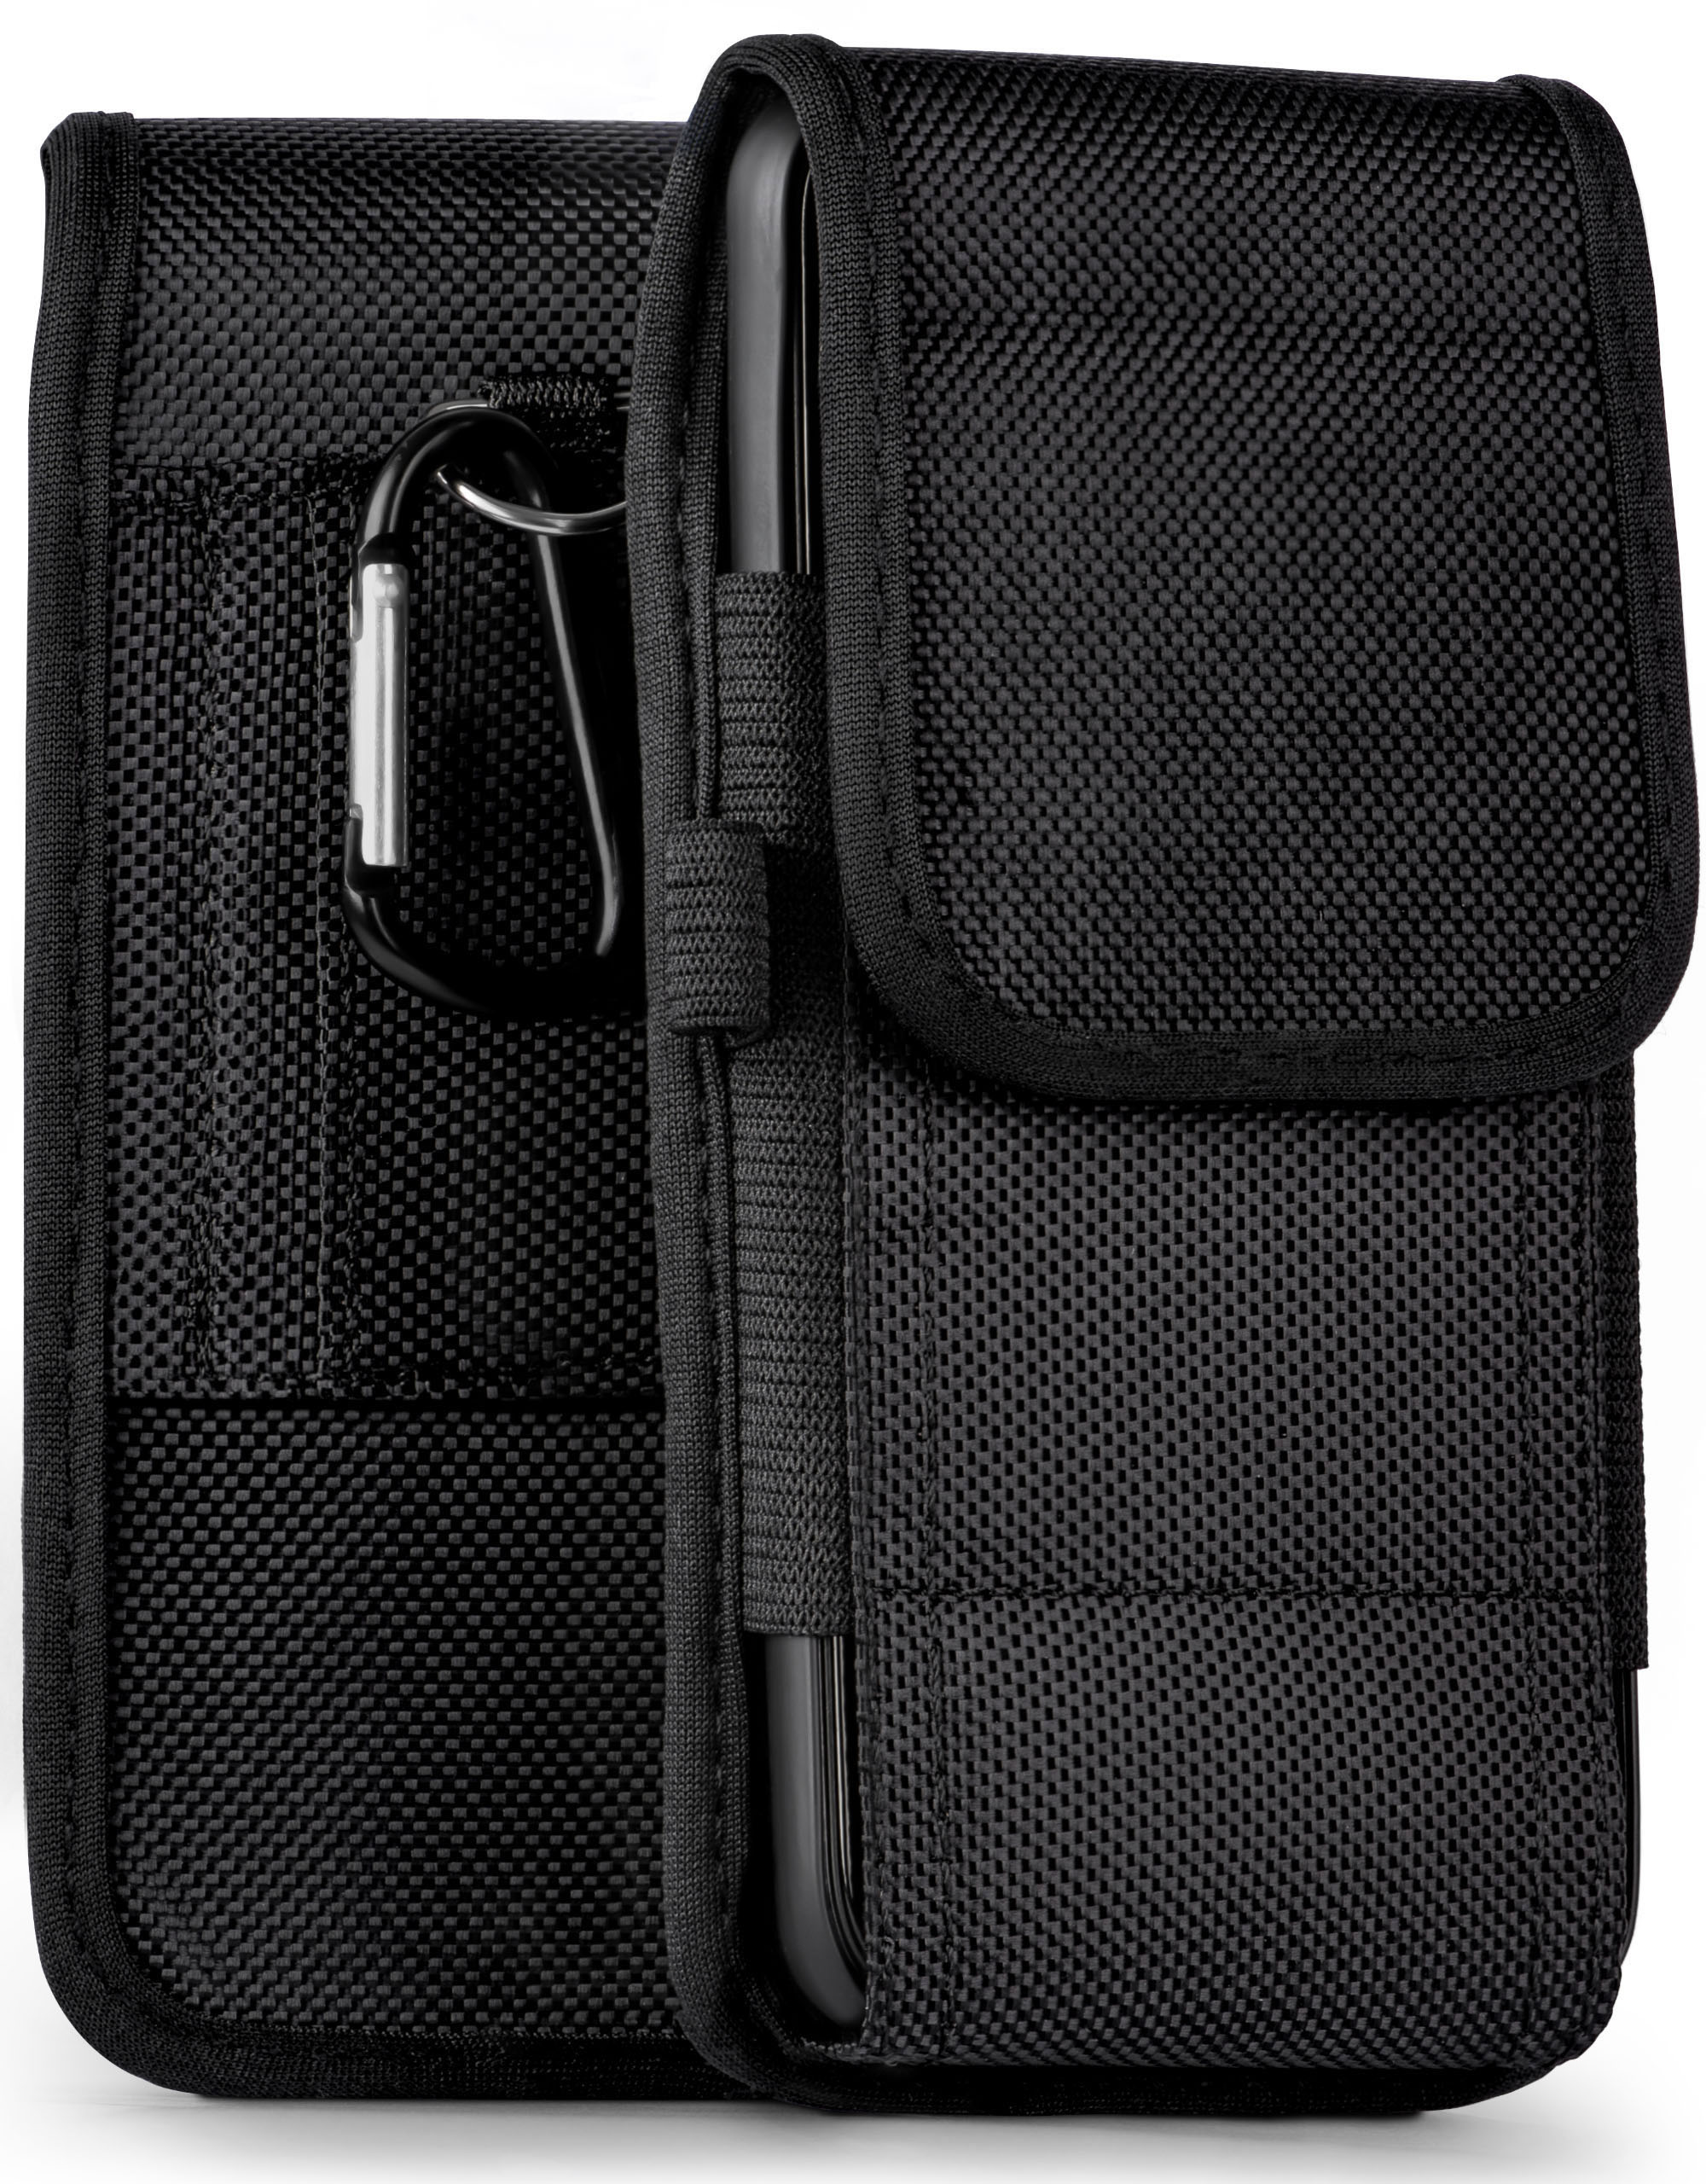 Case, / MOEX Holster, Trail Agility 6.2 7.2, Nokia,